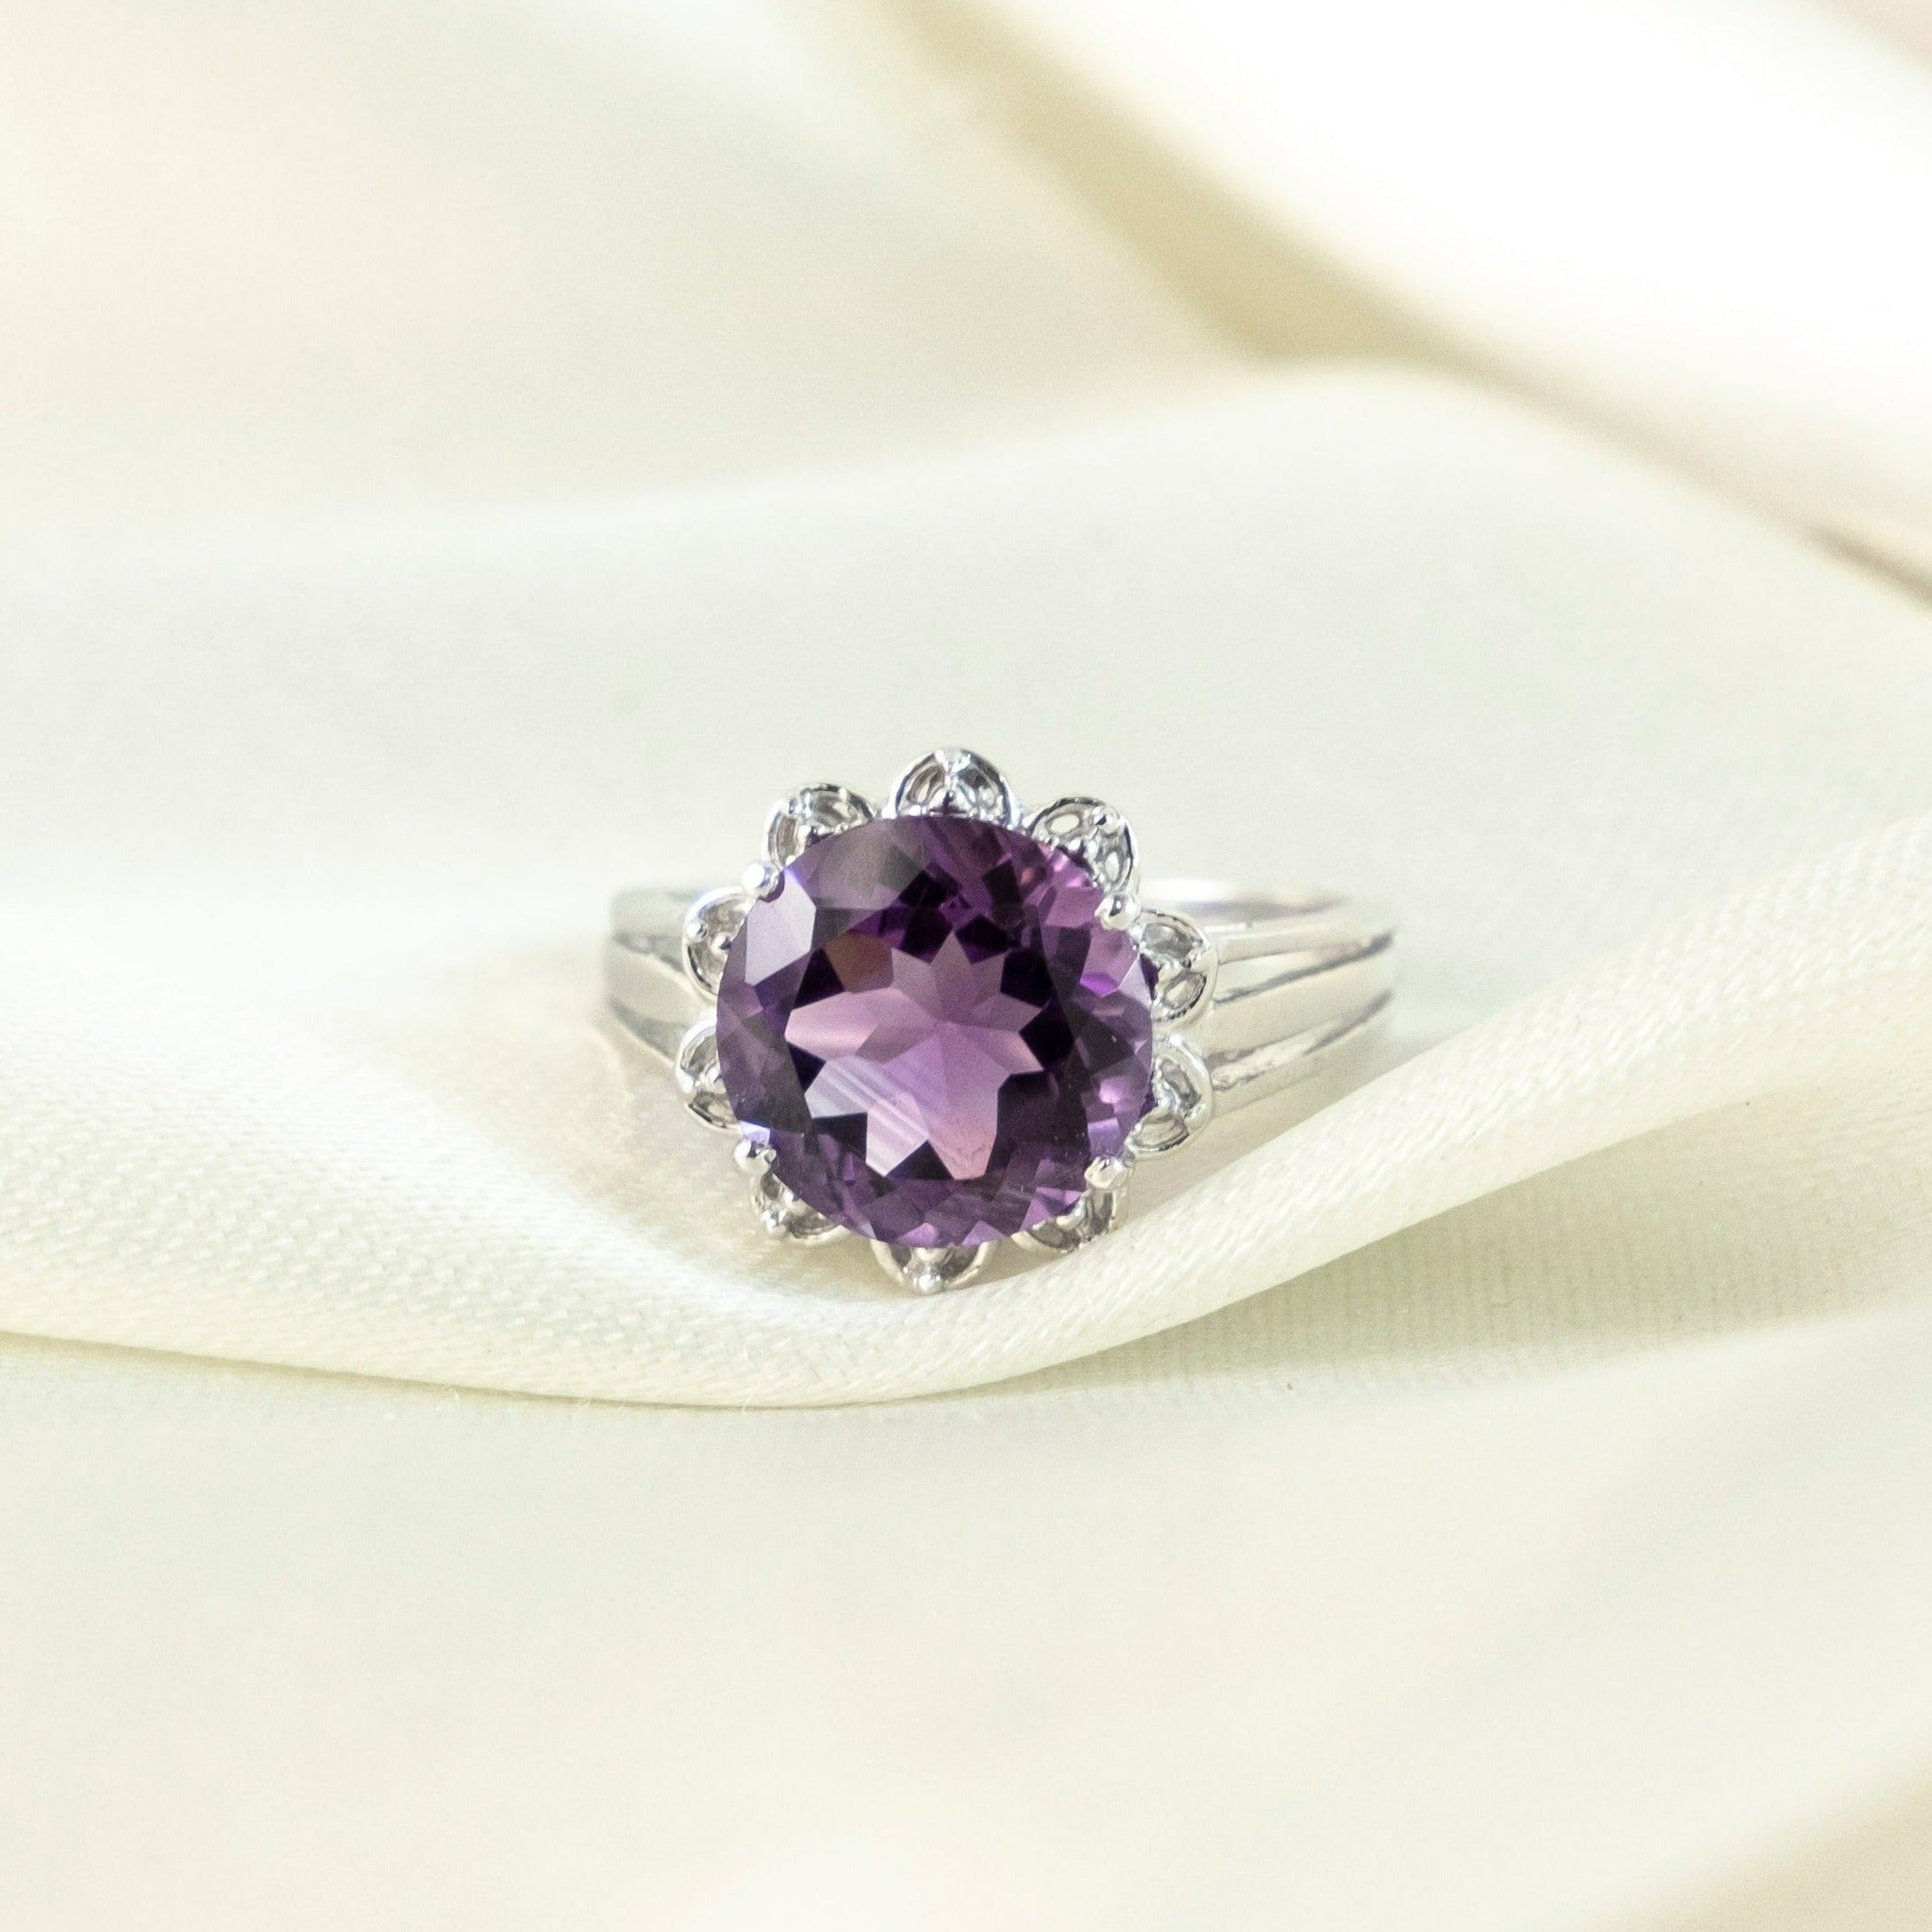 Sterling Silver Cocktail Ring with 3 Amethyst Stones - Fantastic Purple |  NOVICA